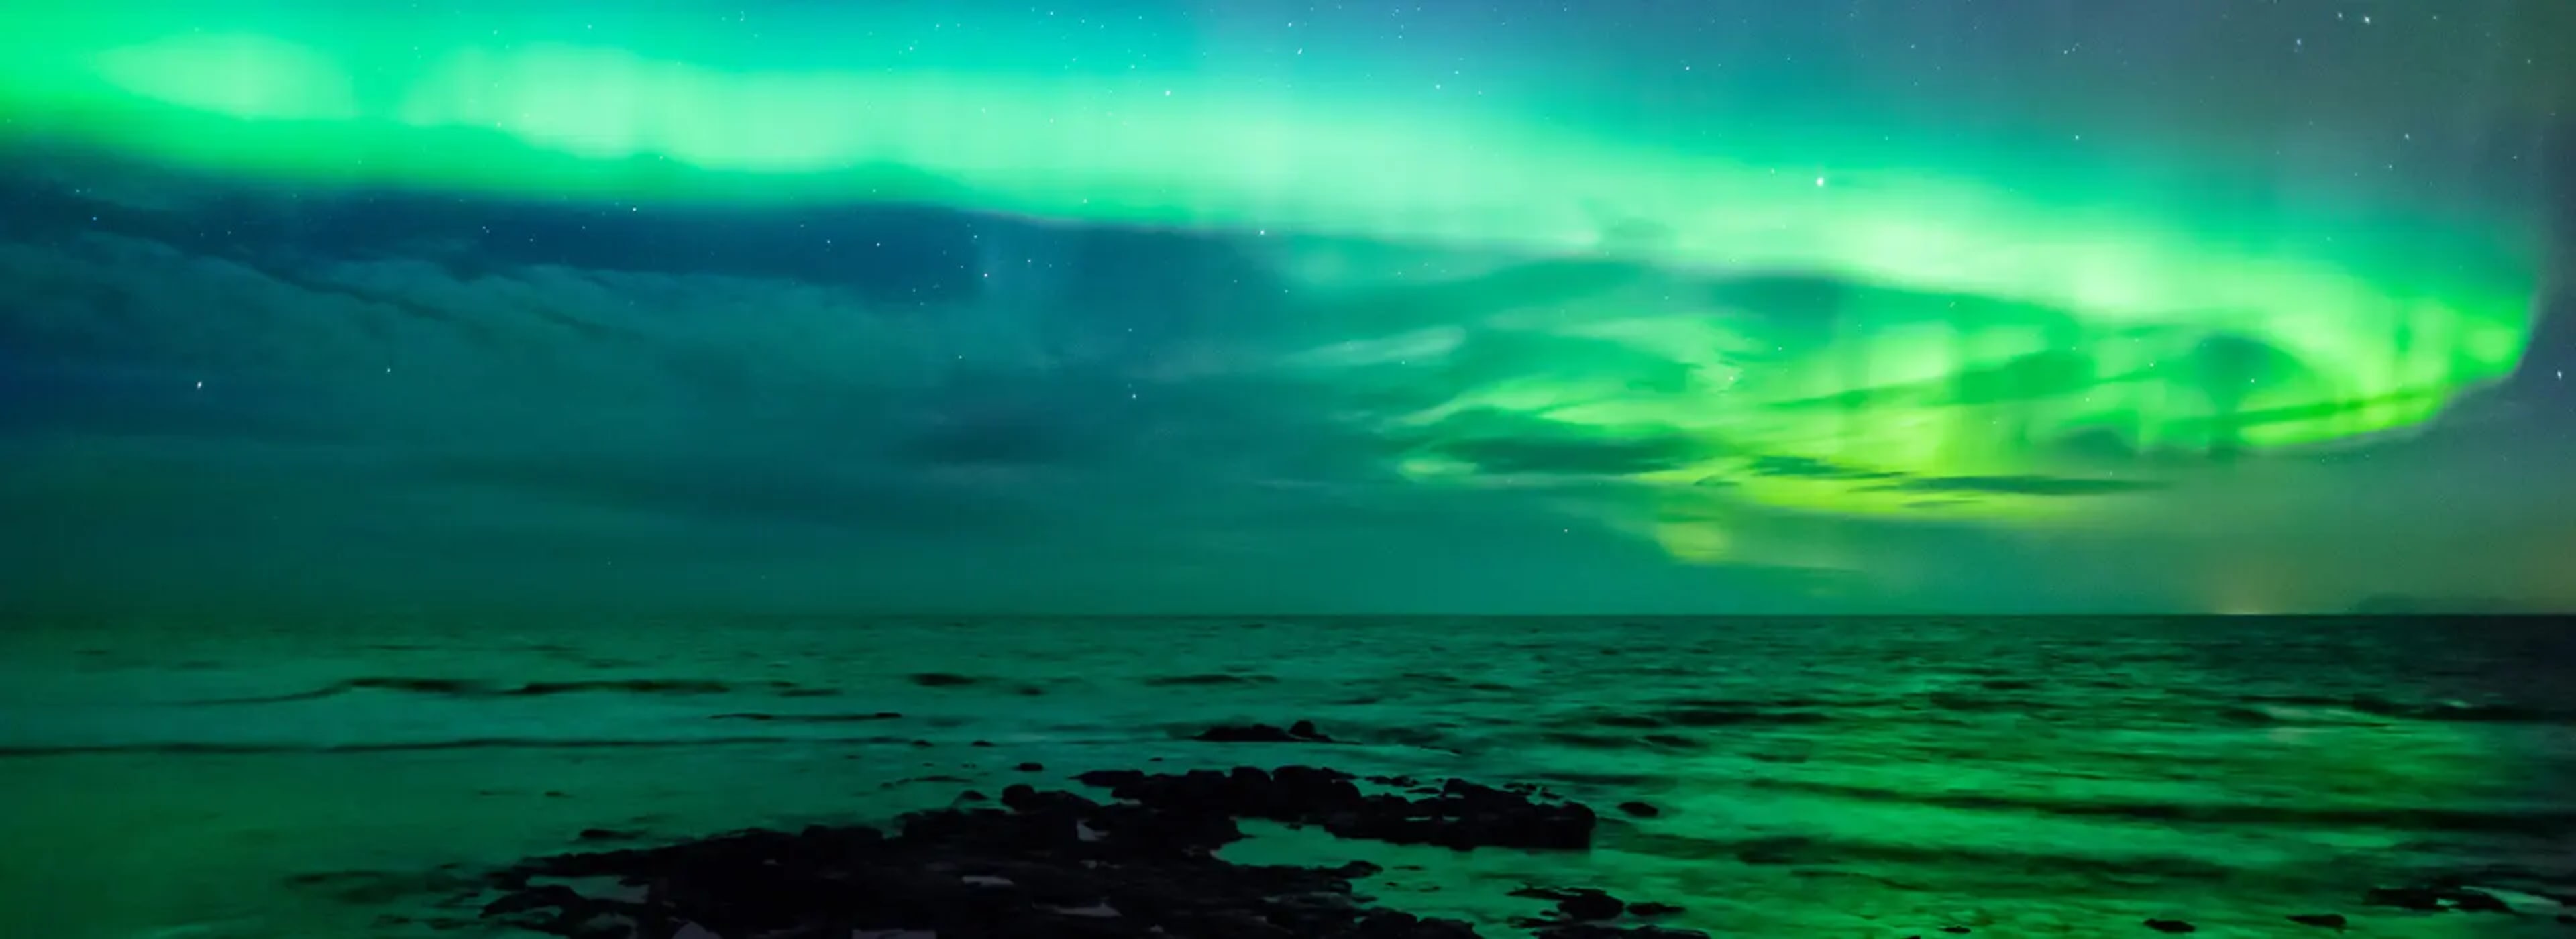 Northern Lights illuminates the sky above the sea in Iceland